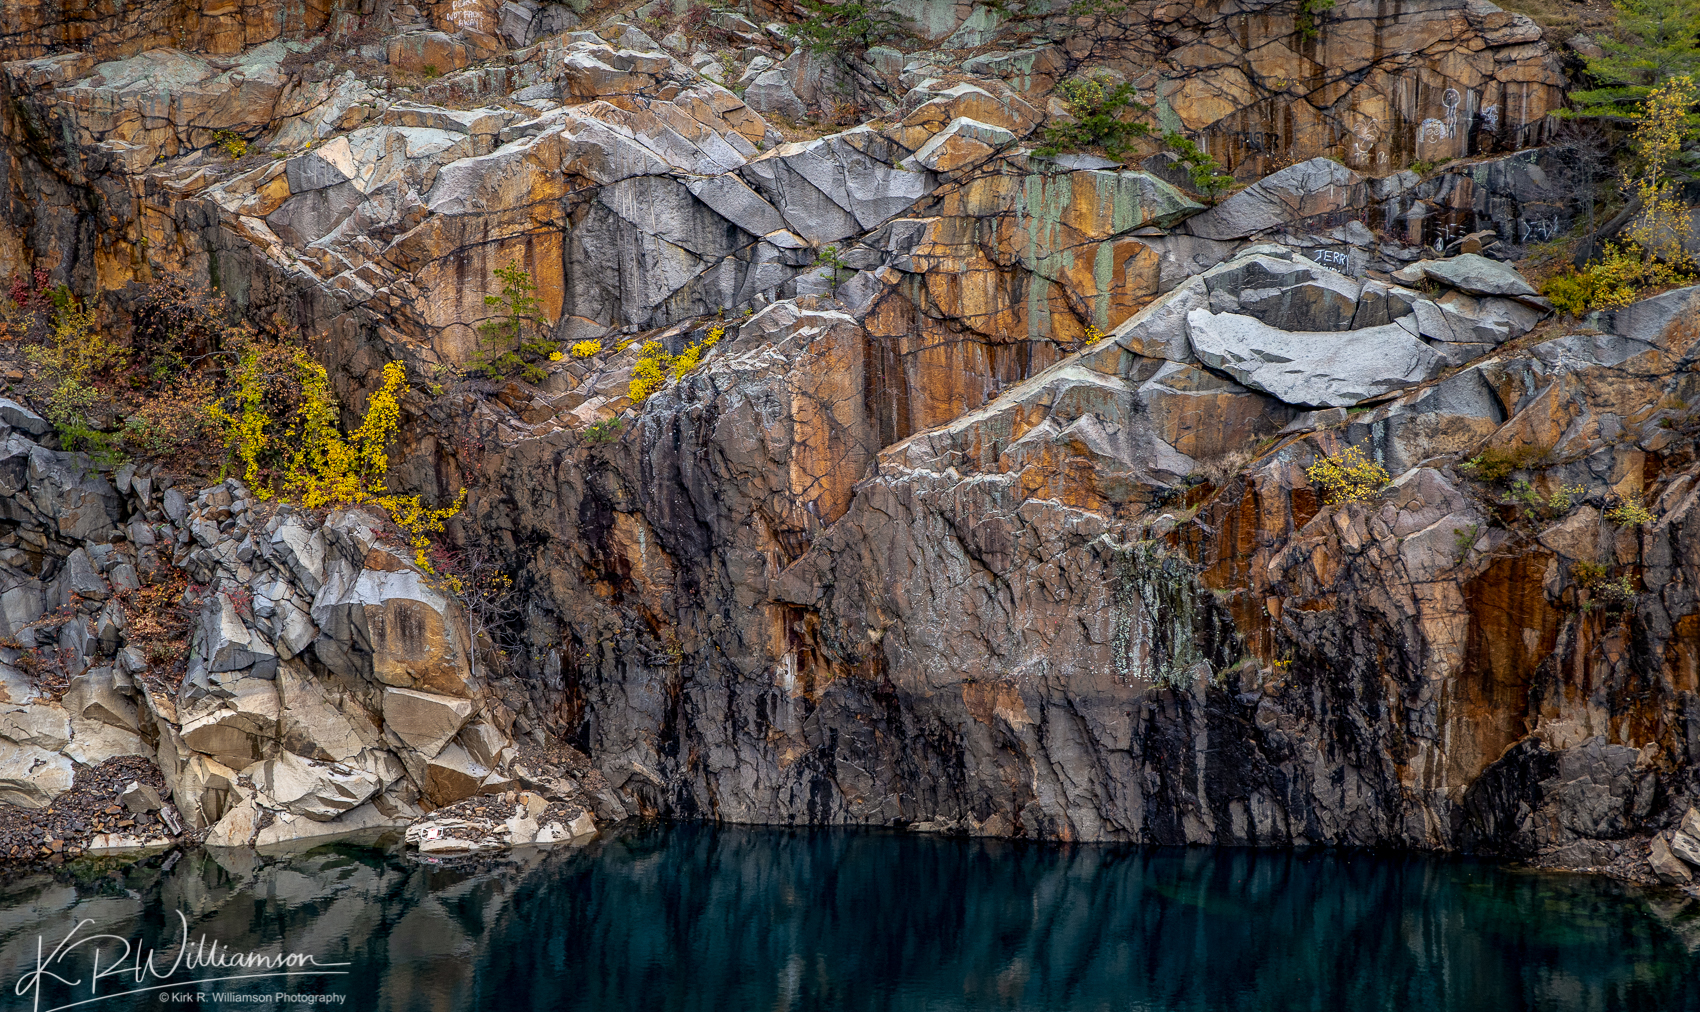 Autumn color and the quarry wall. Canon 24-70 f4L @70